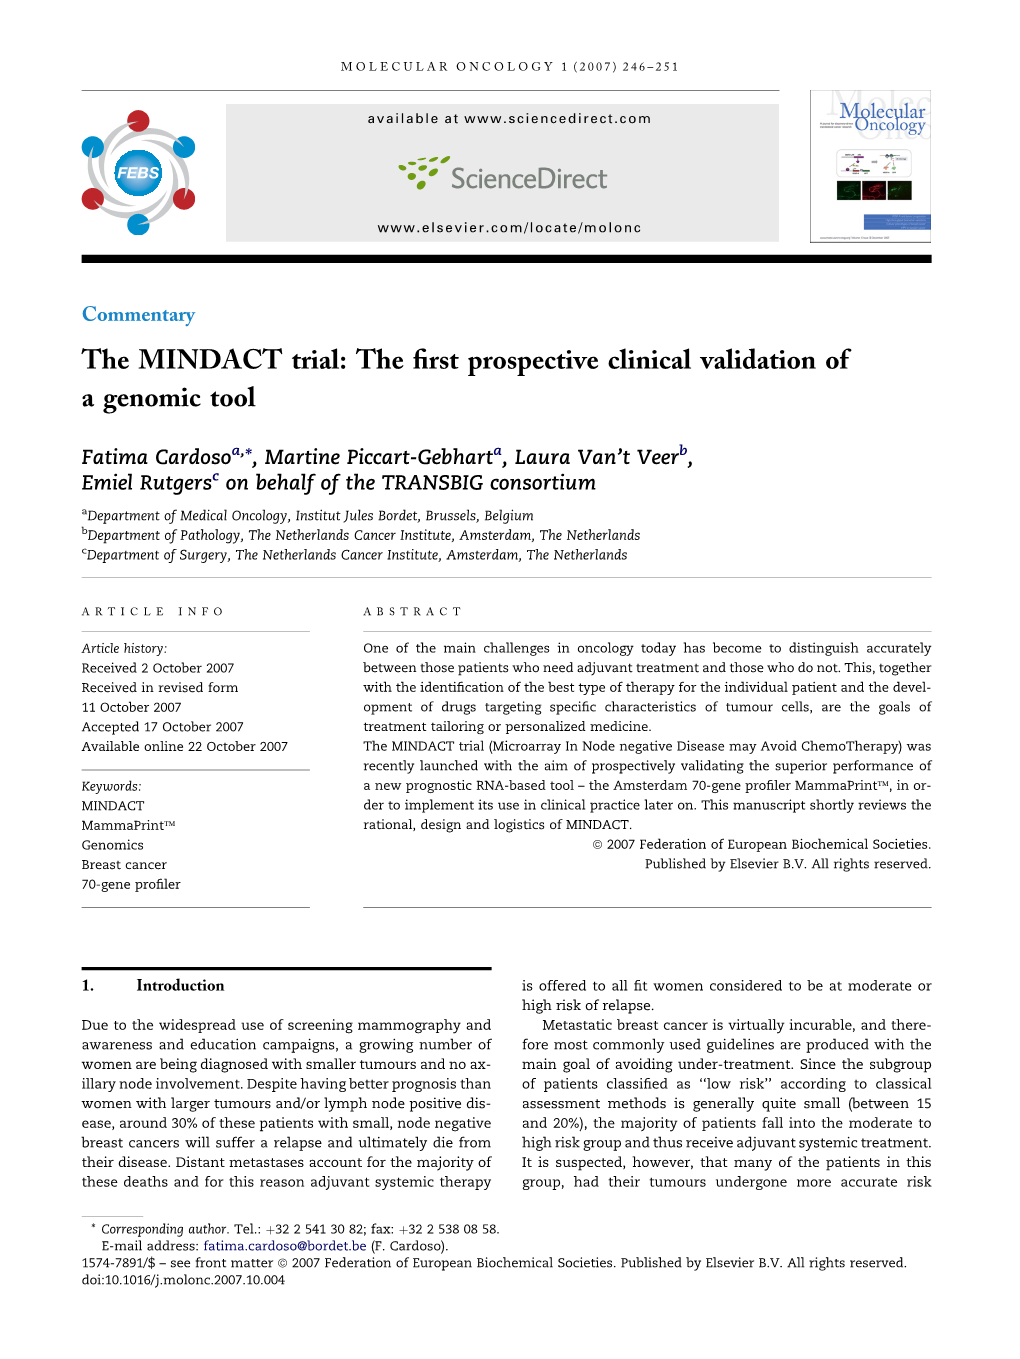 The MINDACT Trial: the First Prospective Clinical Validation of A